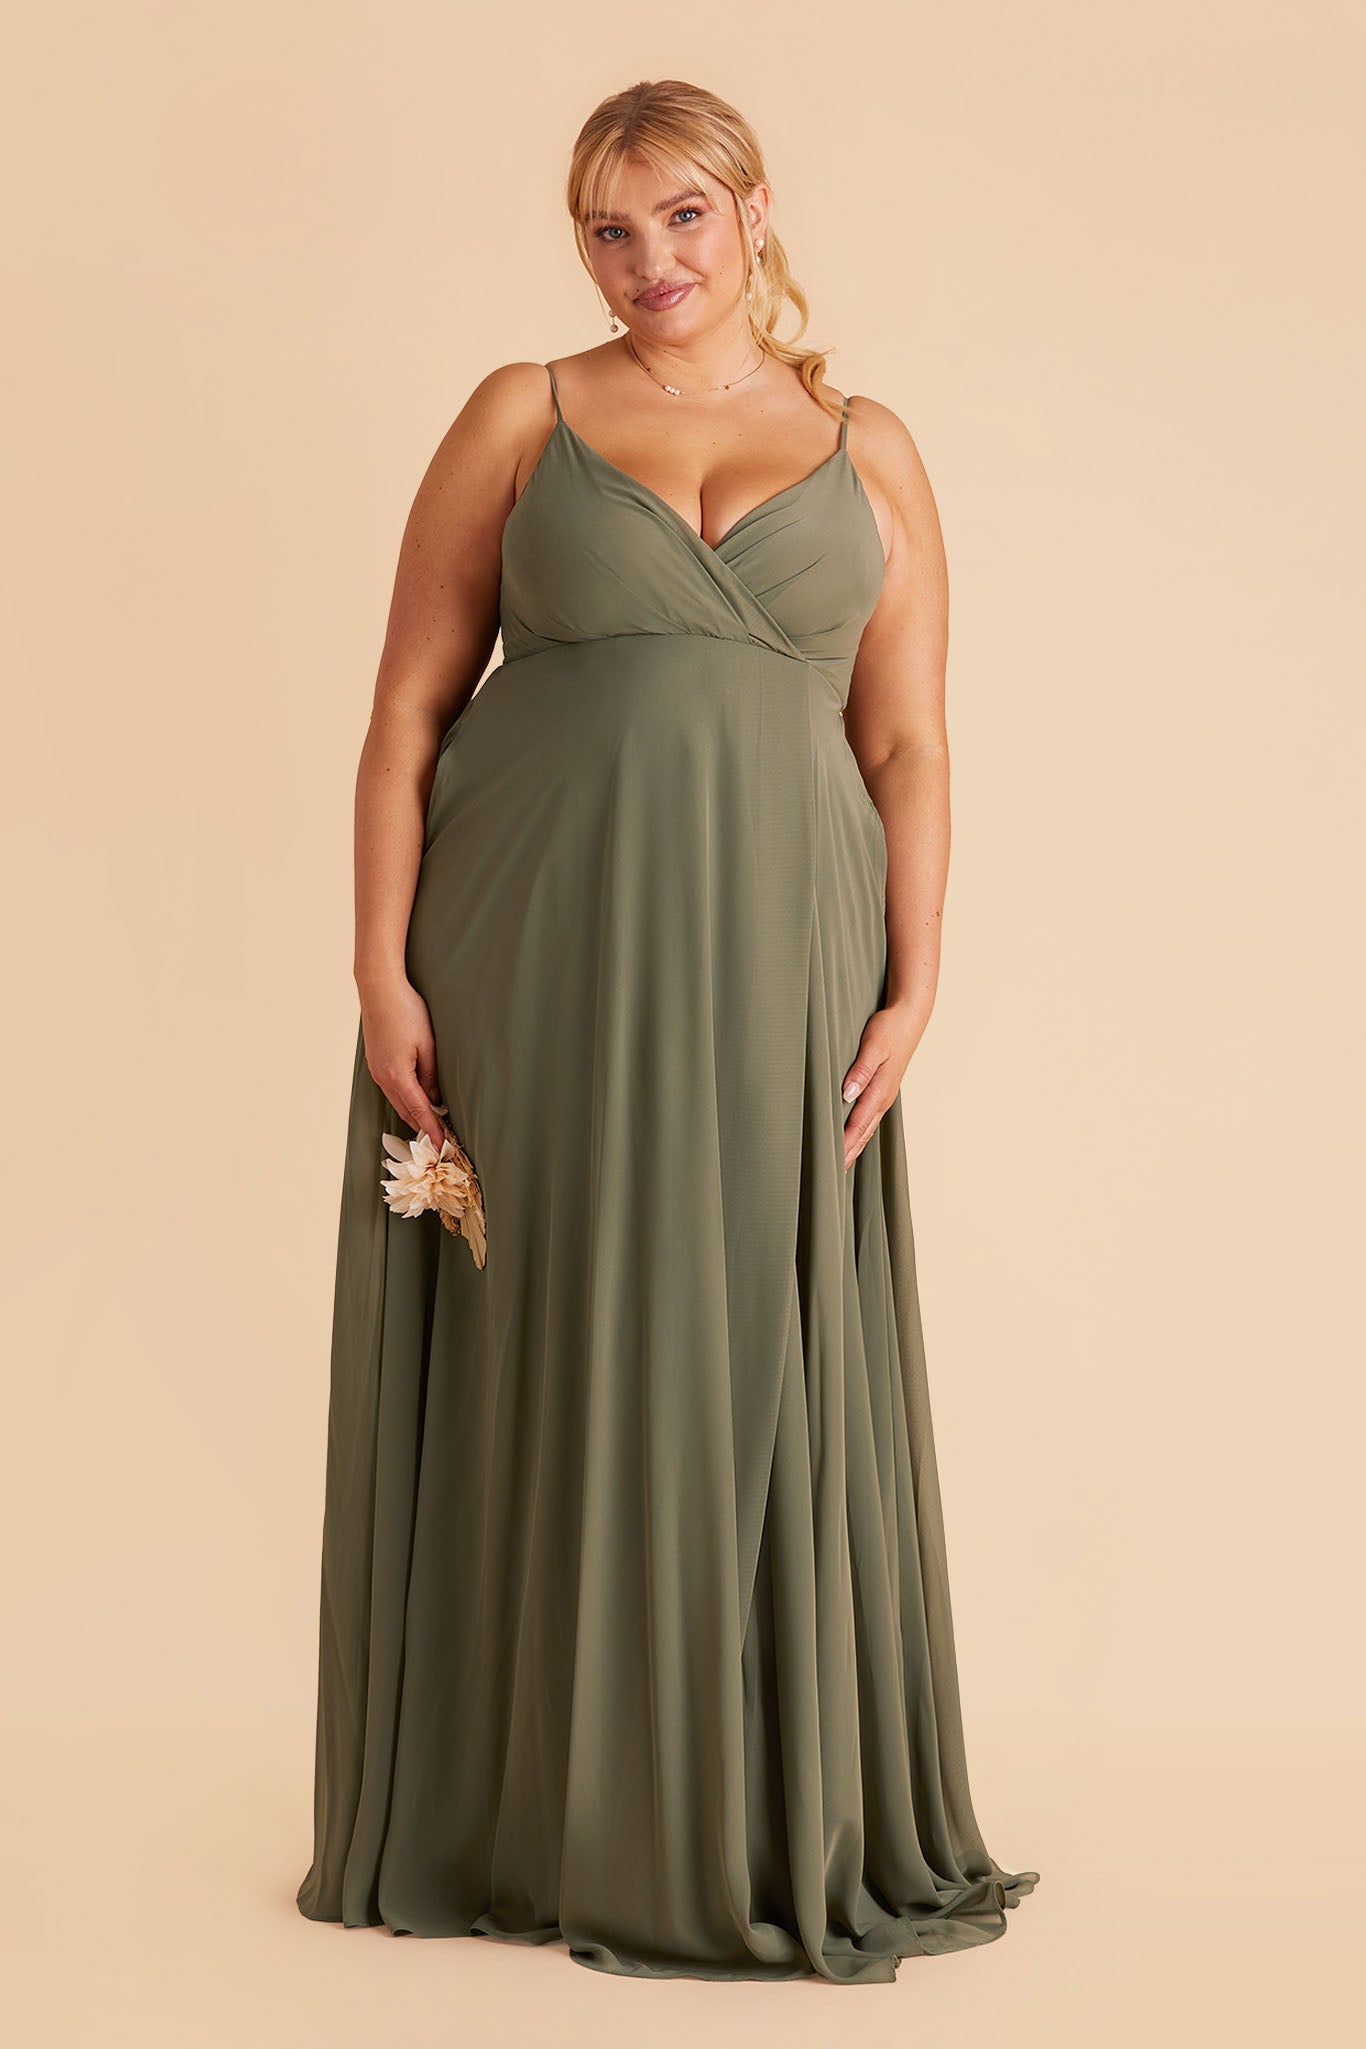 Kaia plus size bridesmaids dress in moss green chiffon by Birdy Grey, front view